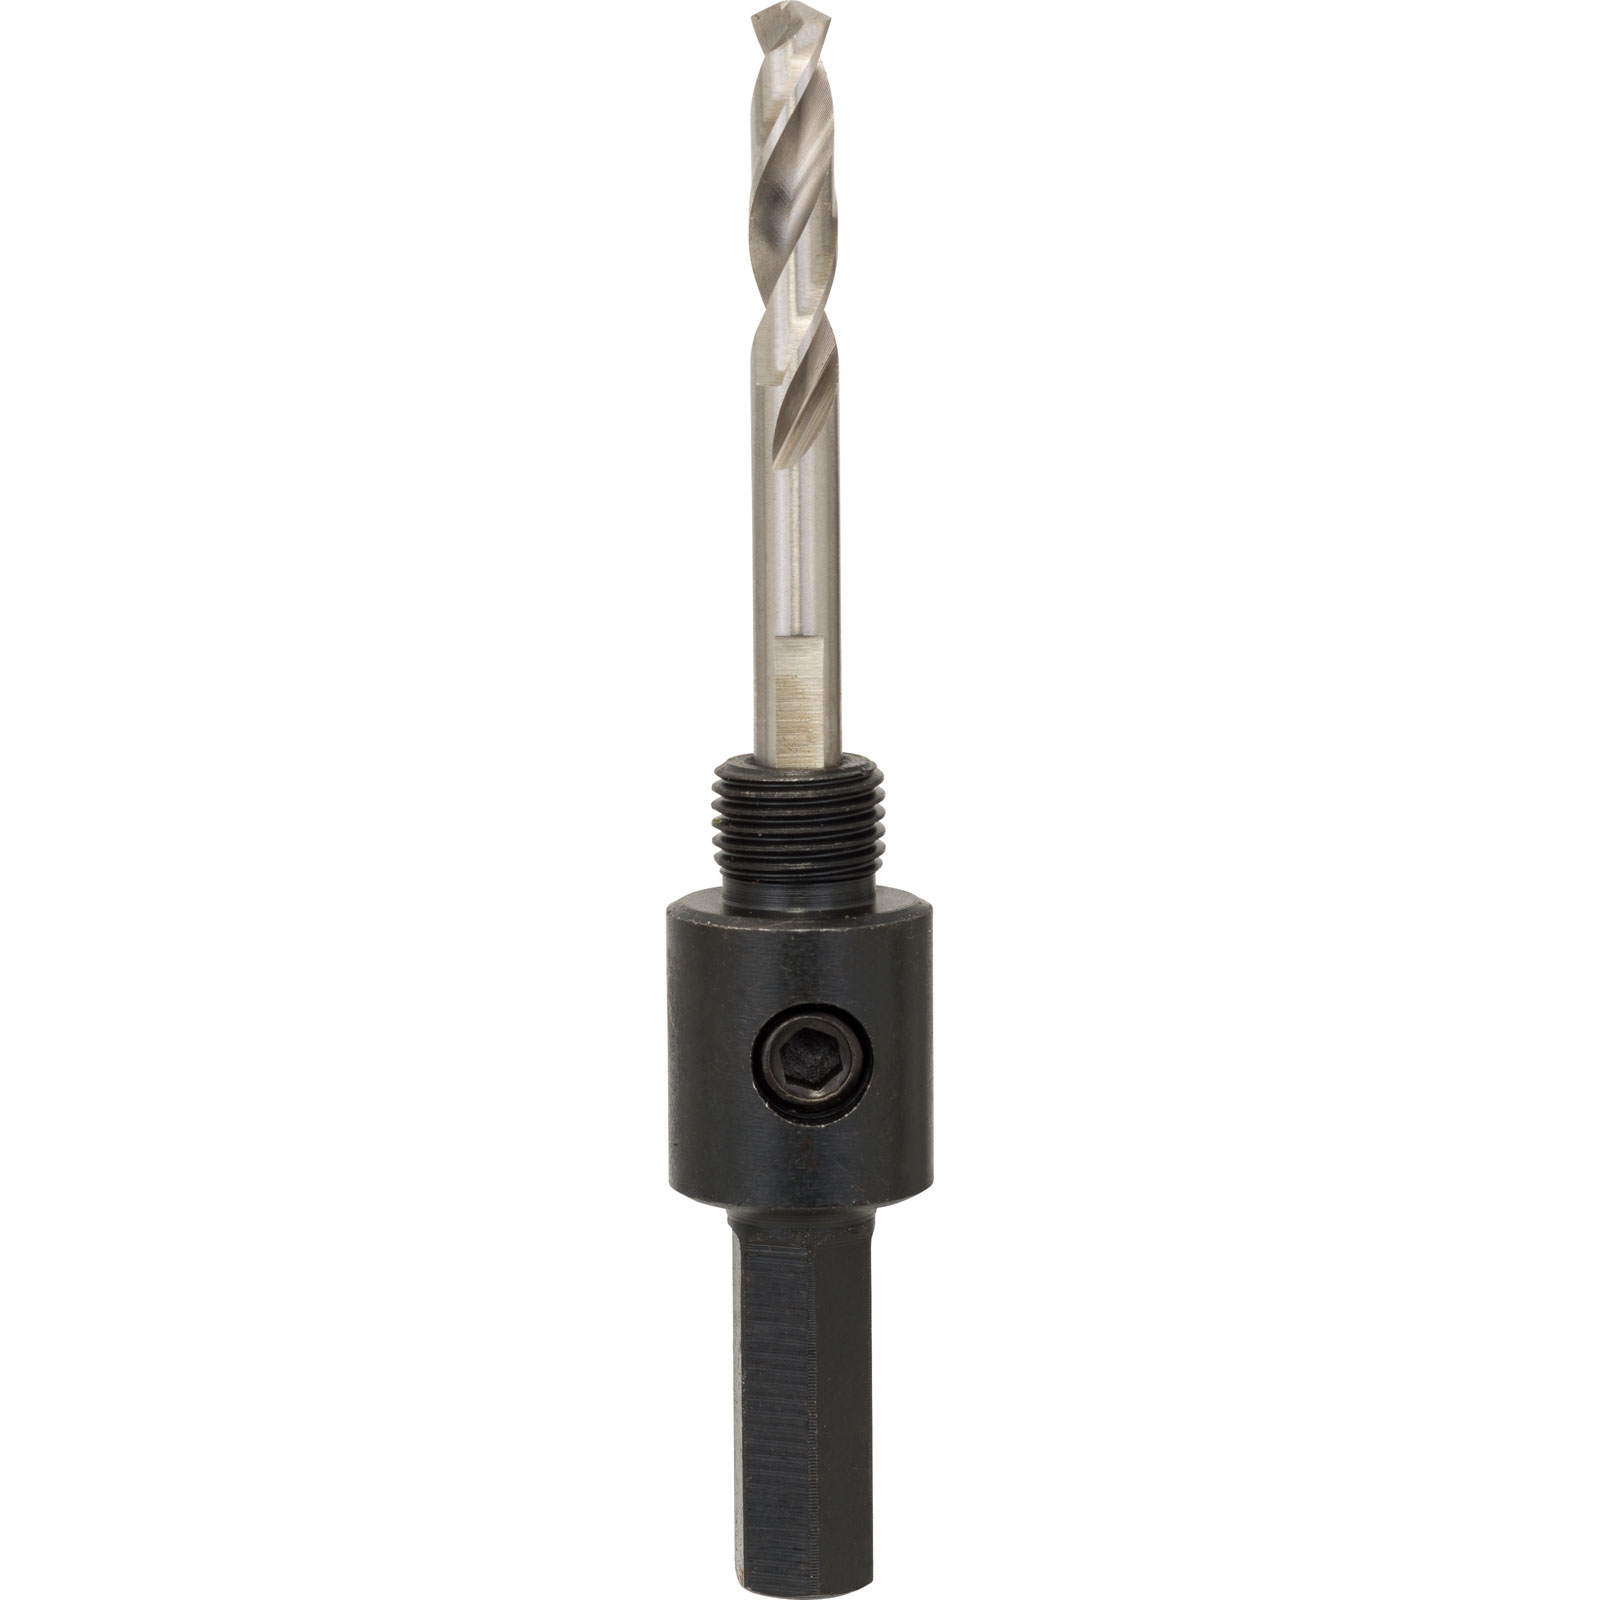 Image of Bosch Hex Shank Arbor for 14 - 30mm Hole Saws